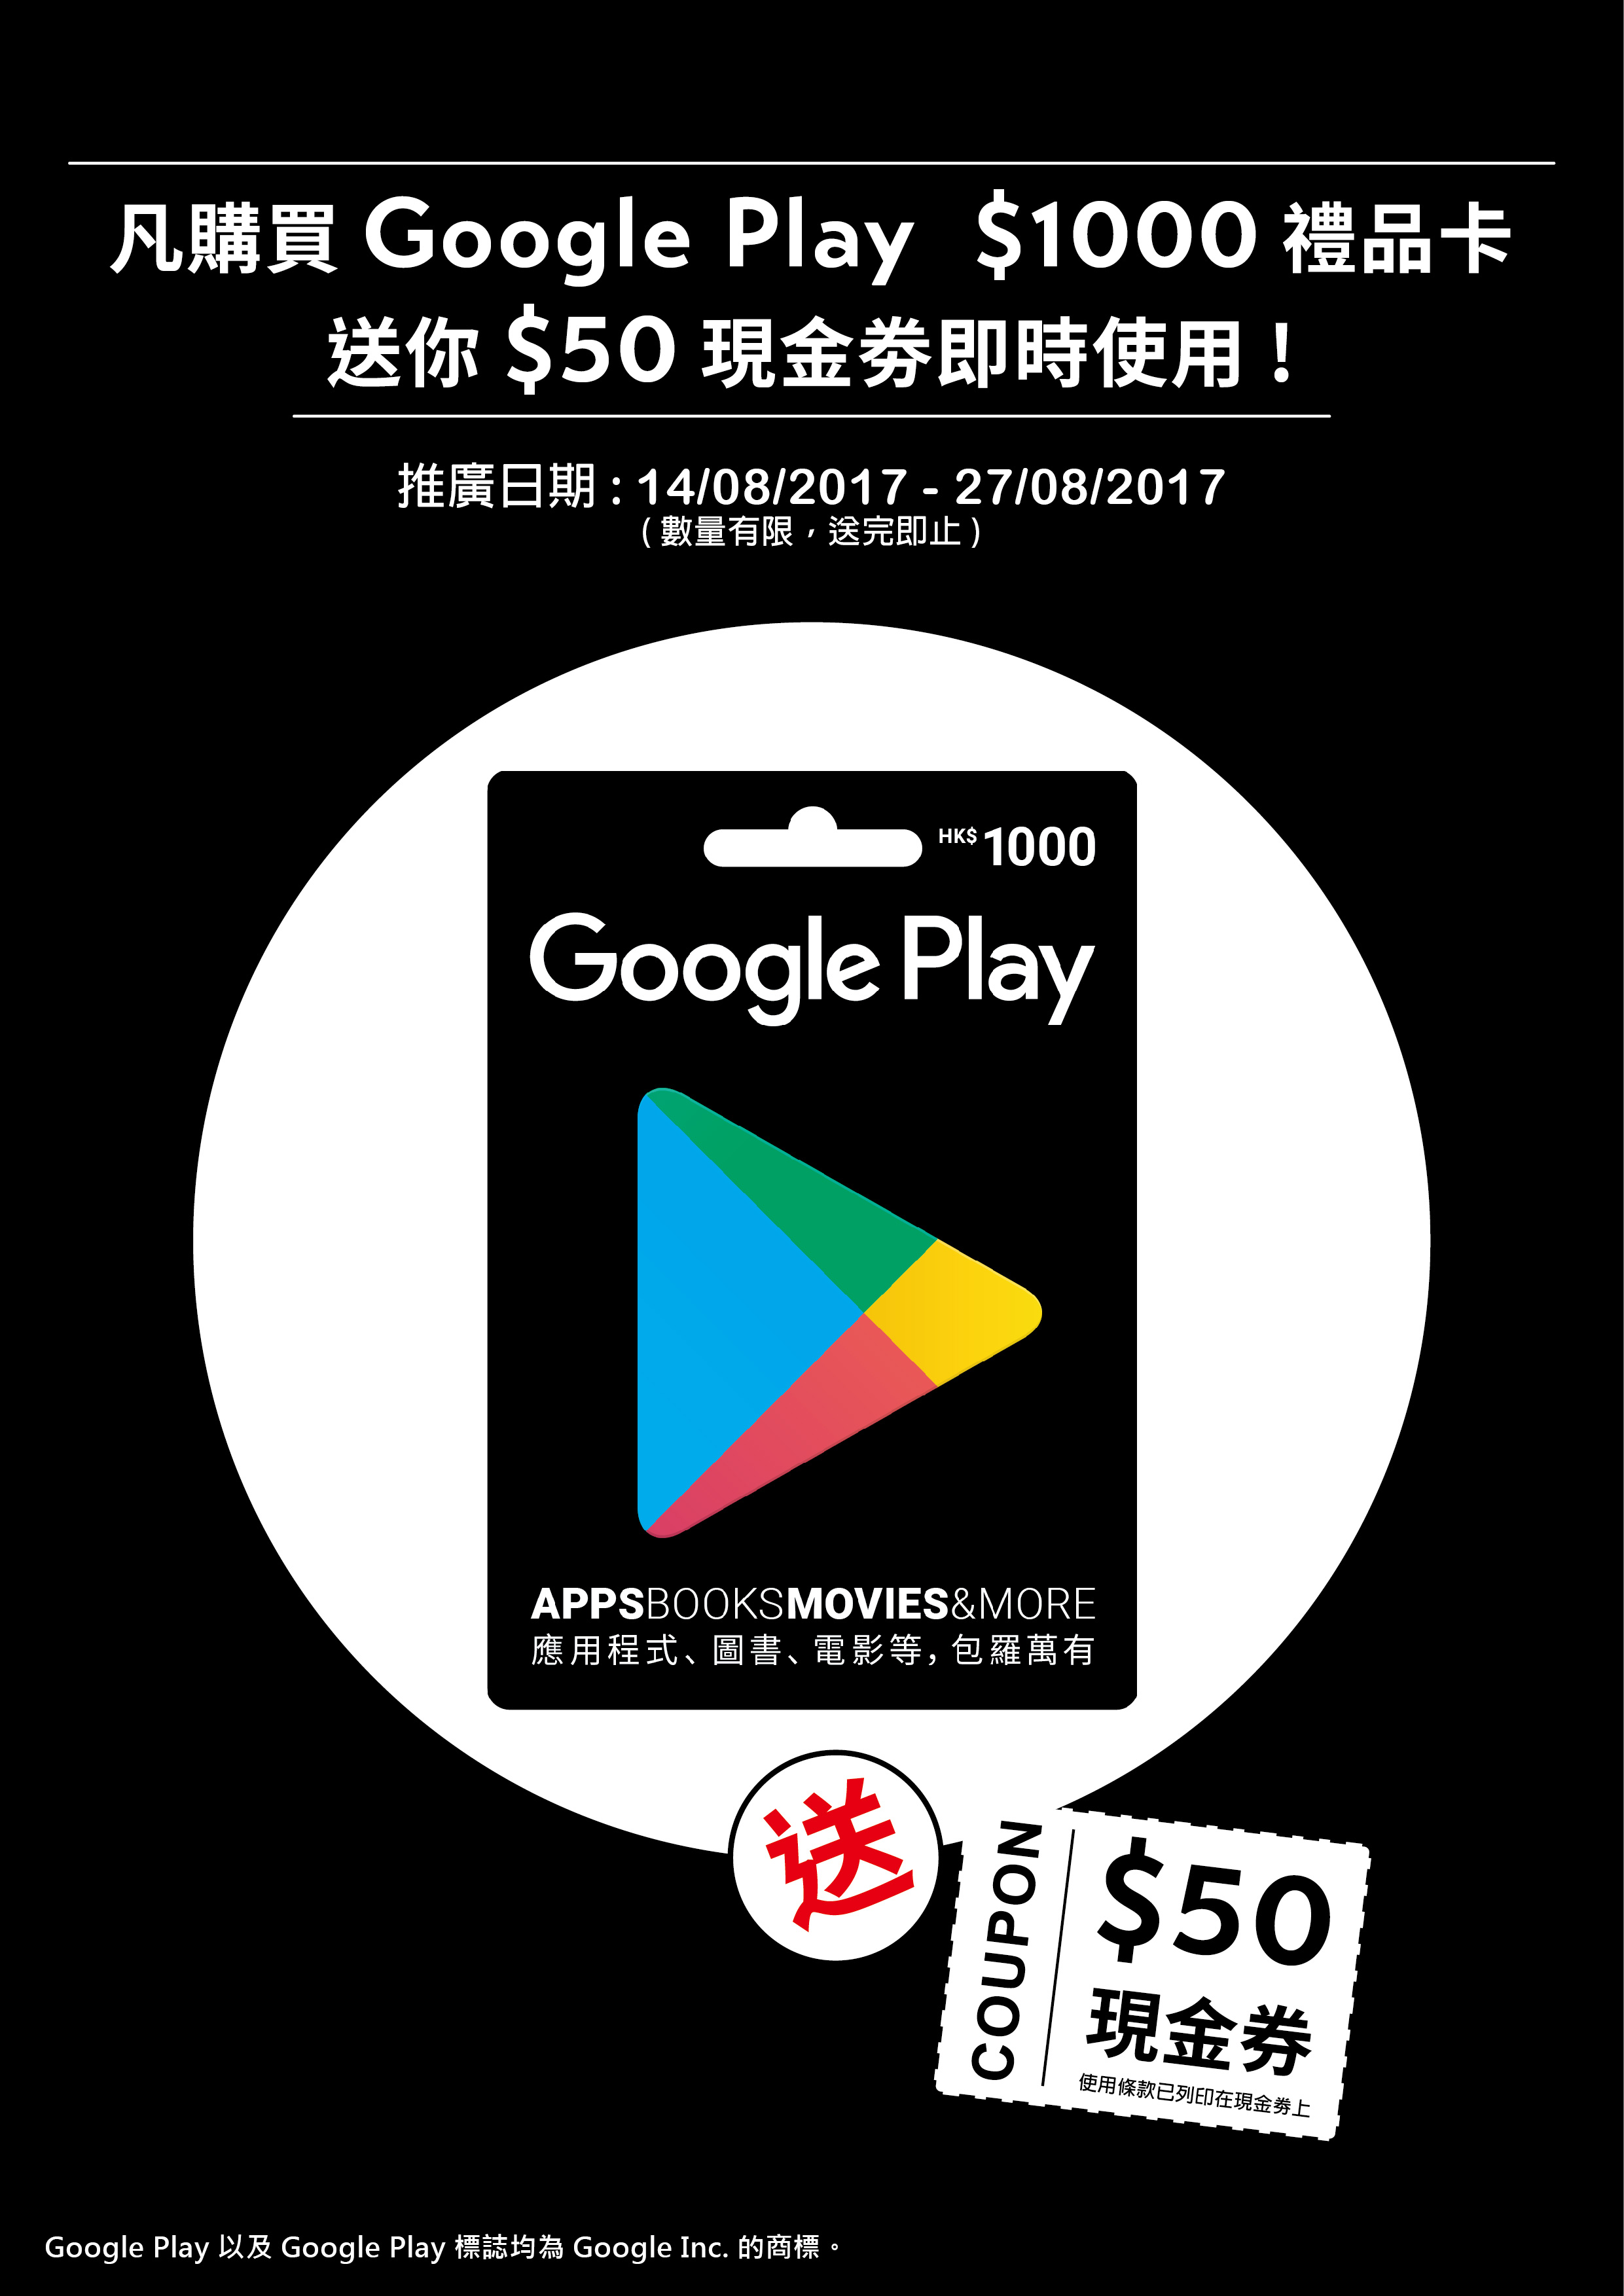 Google Play Promotion, GSE,